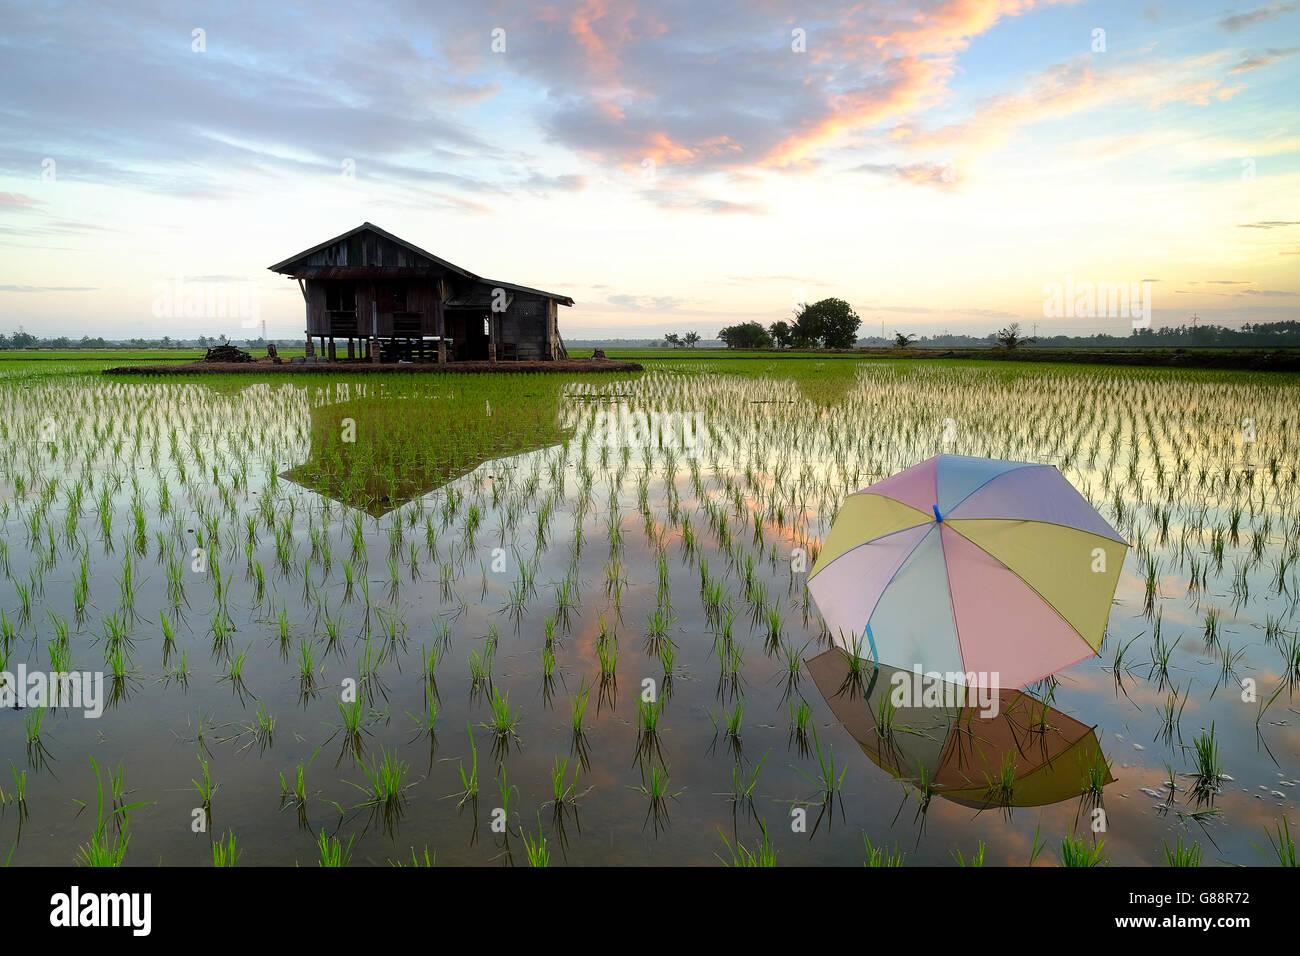 Multi-colored Umbrella and Wooden hut in rice paddy field at sunrise, Selangor, malaysia Stock Photo